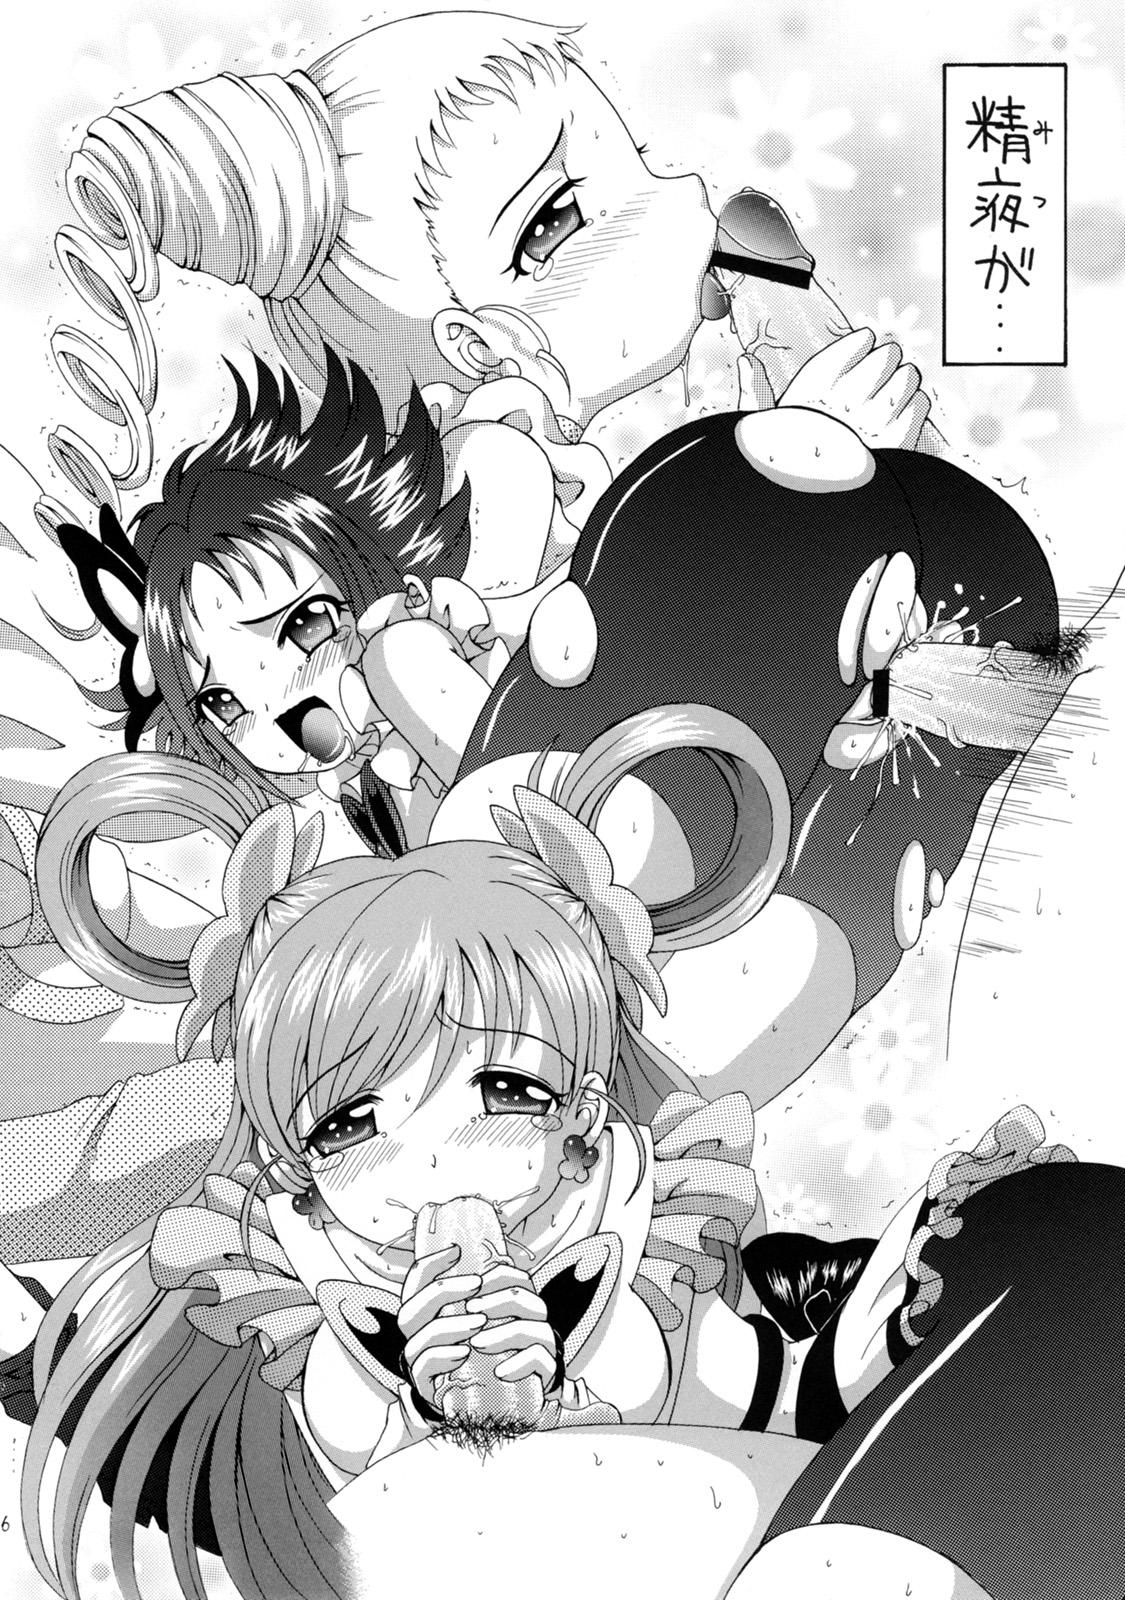 Buceta Yes! Five 1 - Pretty cure Yes precure 5 Lezbi - Page 6